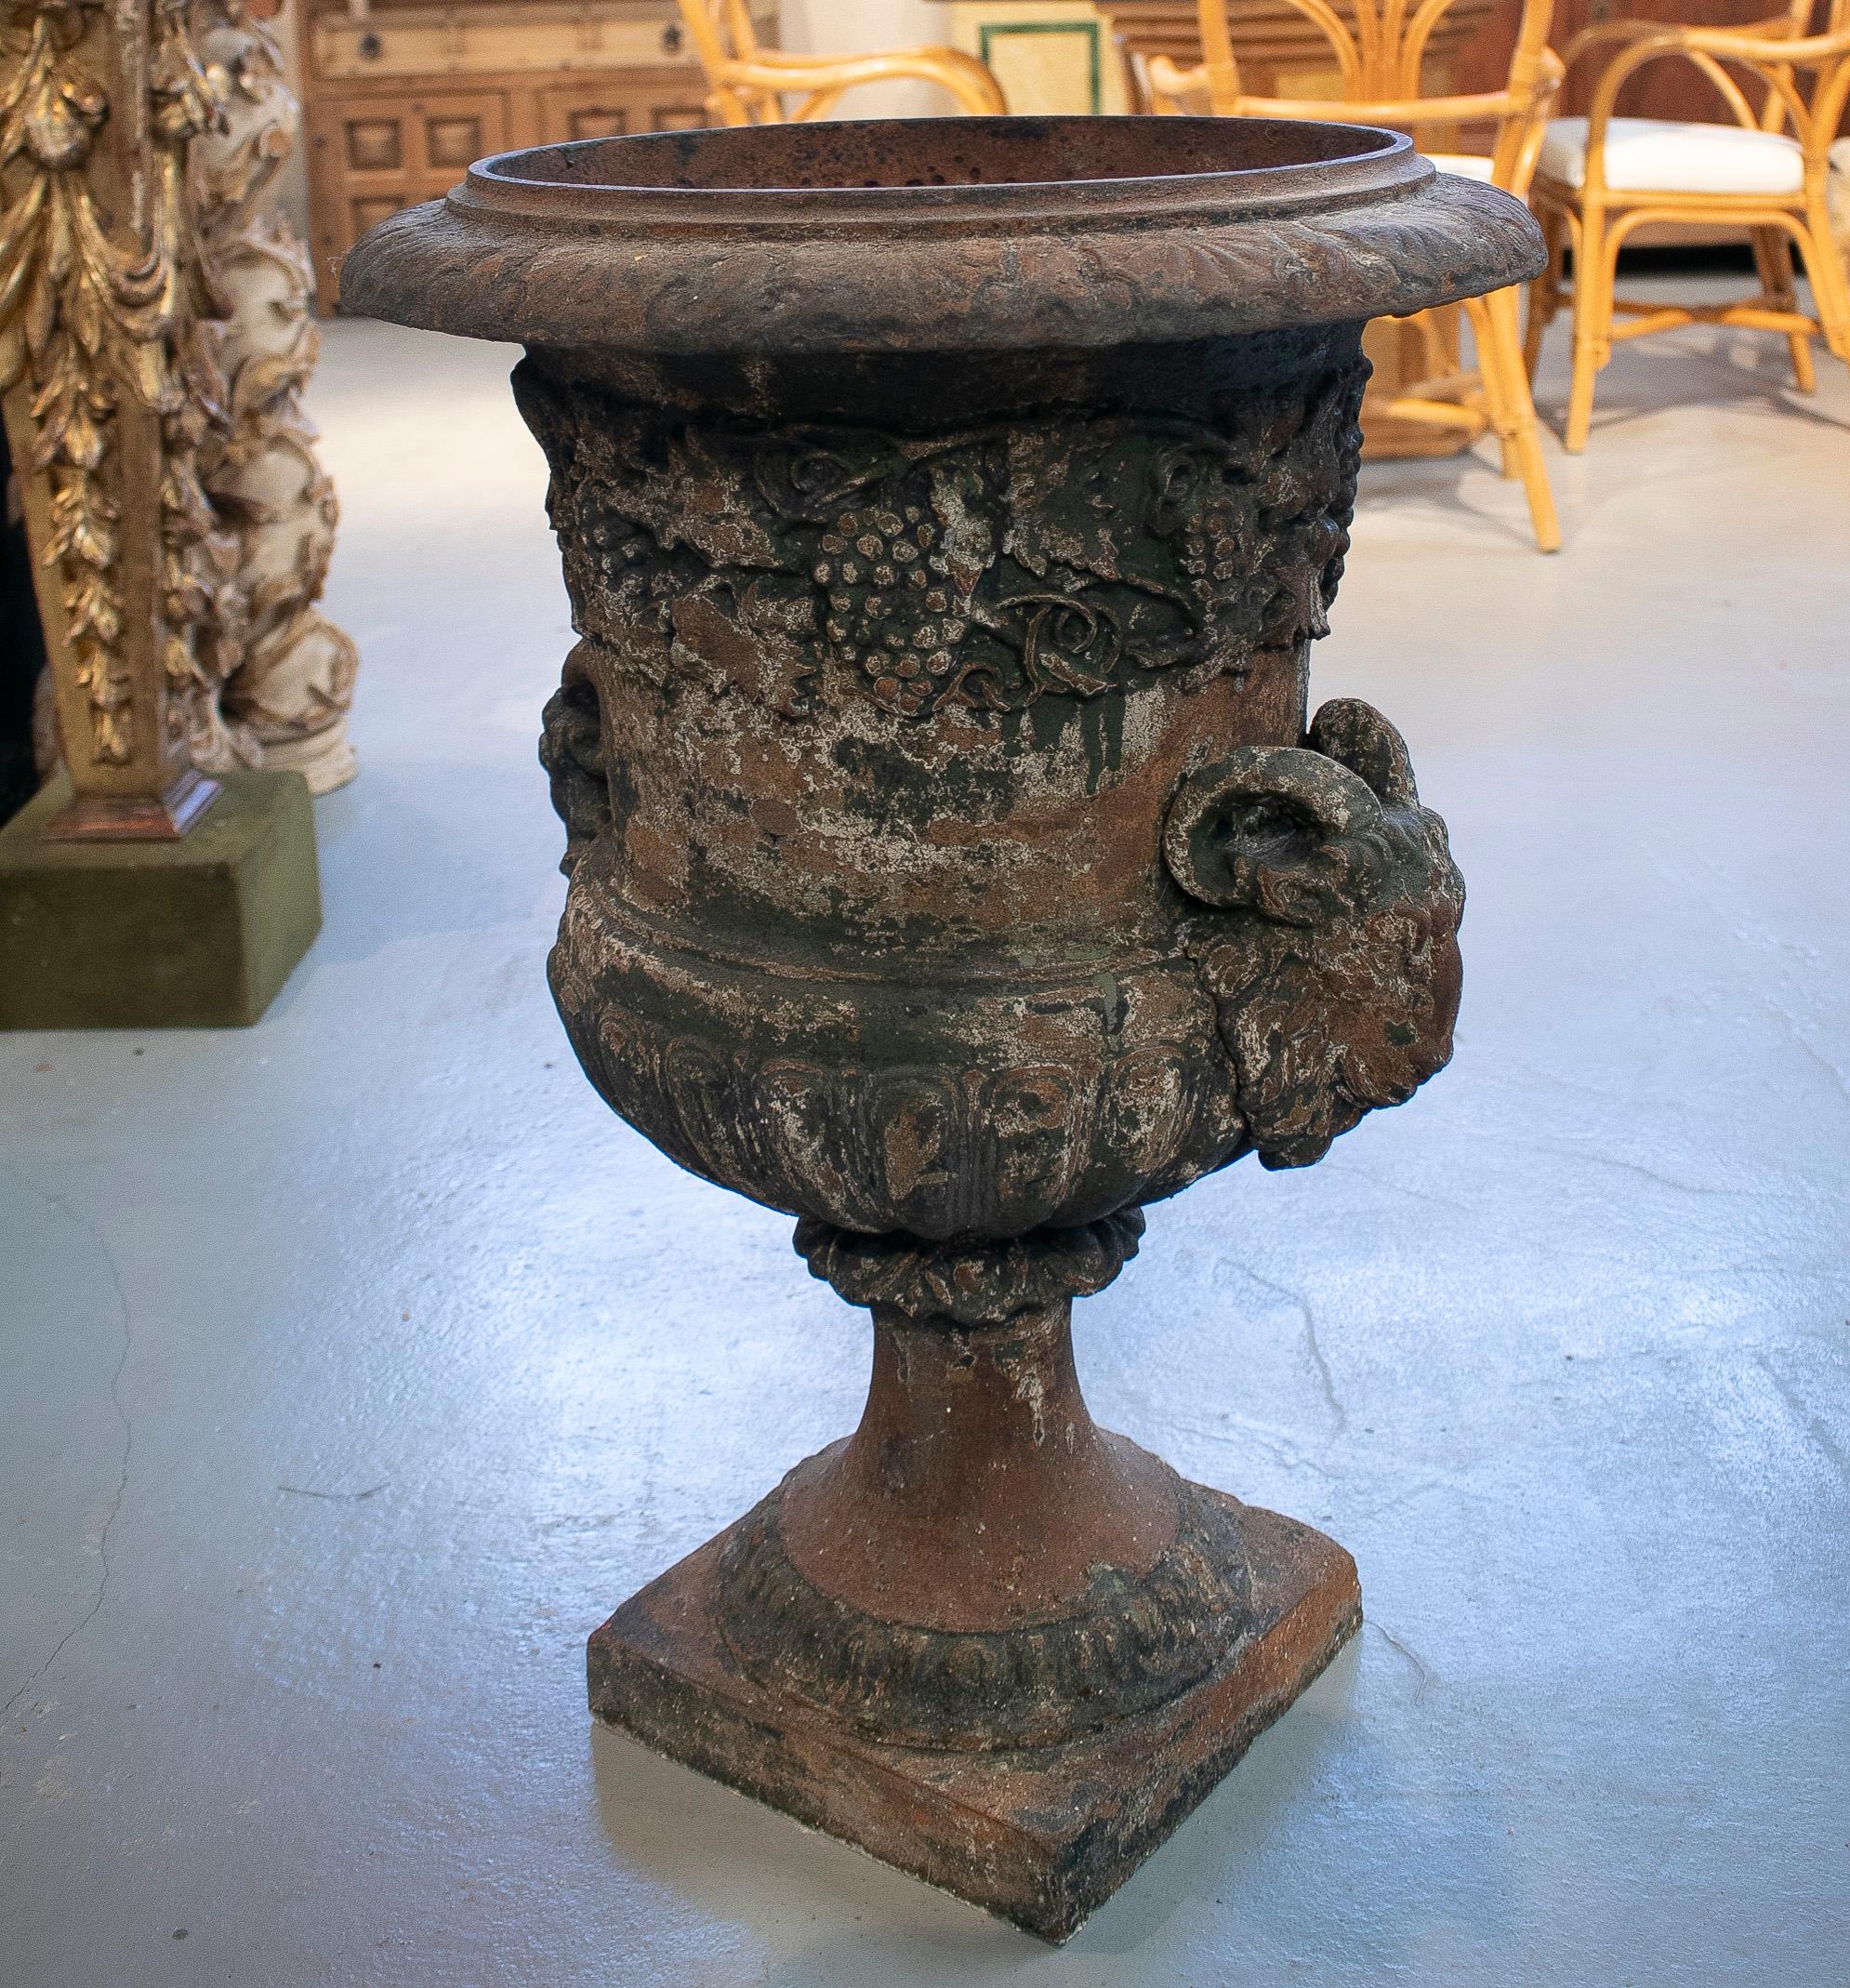 19th century Spanish cast iron painted garden urn planter with goat heads.